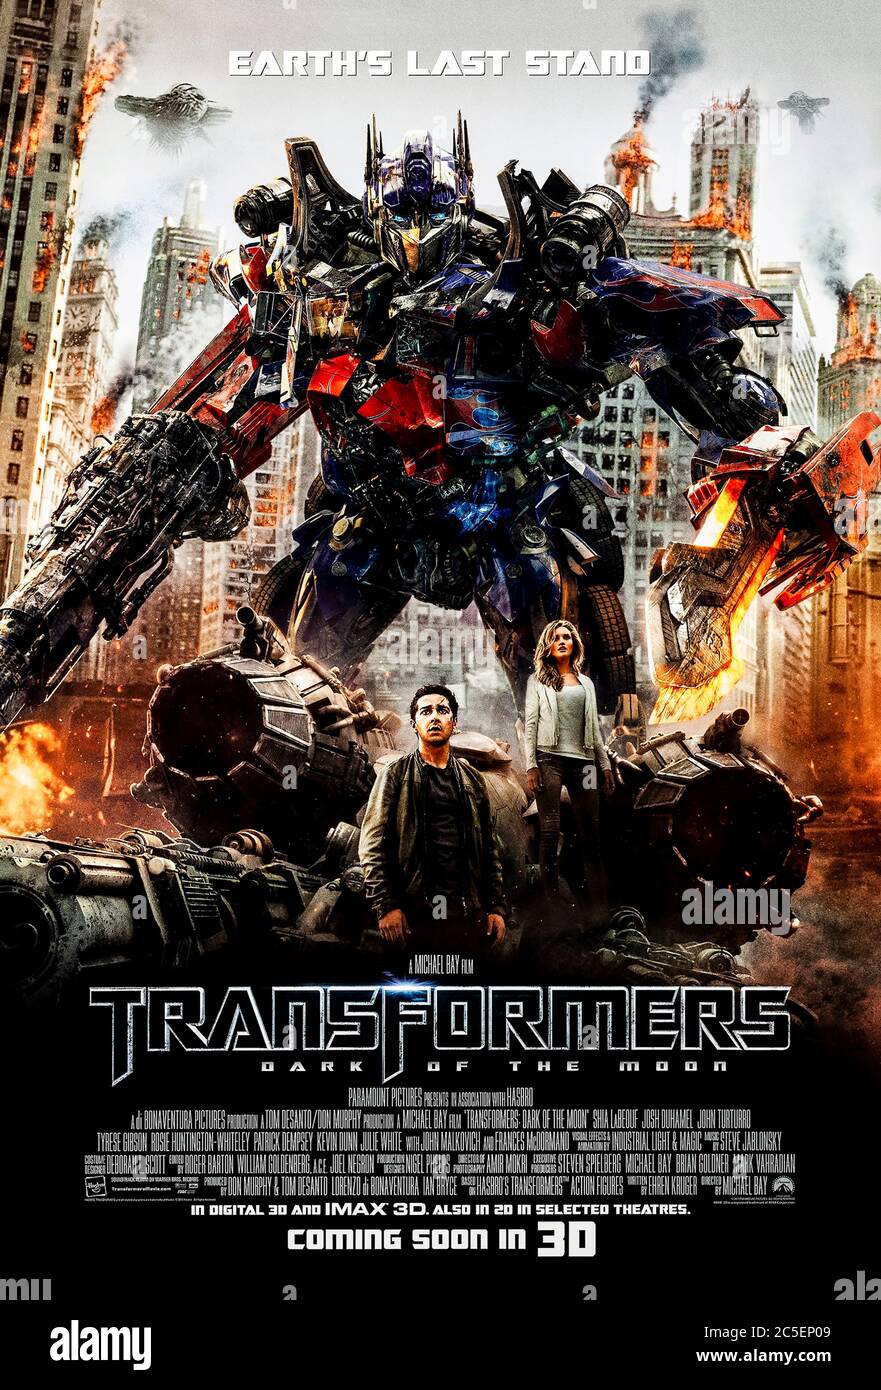 Transformers: Dark of the Moon (2011) directed by Michael Bay and starring Shia LaBeouf, Rosie Huntington-Whiteley, Tyrese Gibson and John Malkovich. The Autobots and Decepticons race to get to a spacecraft from Cybertron found on the moon. Stock Photo